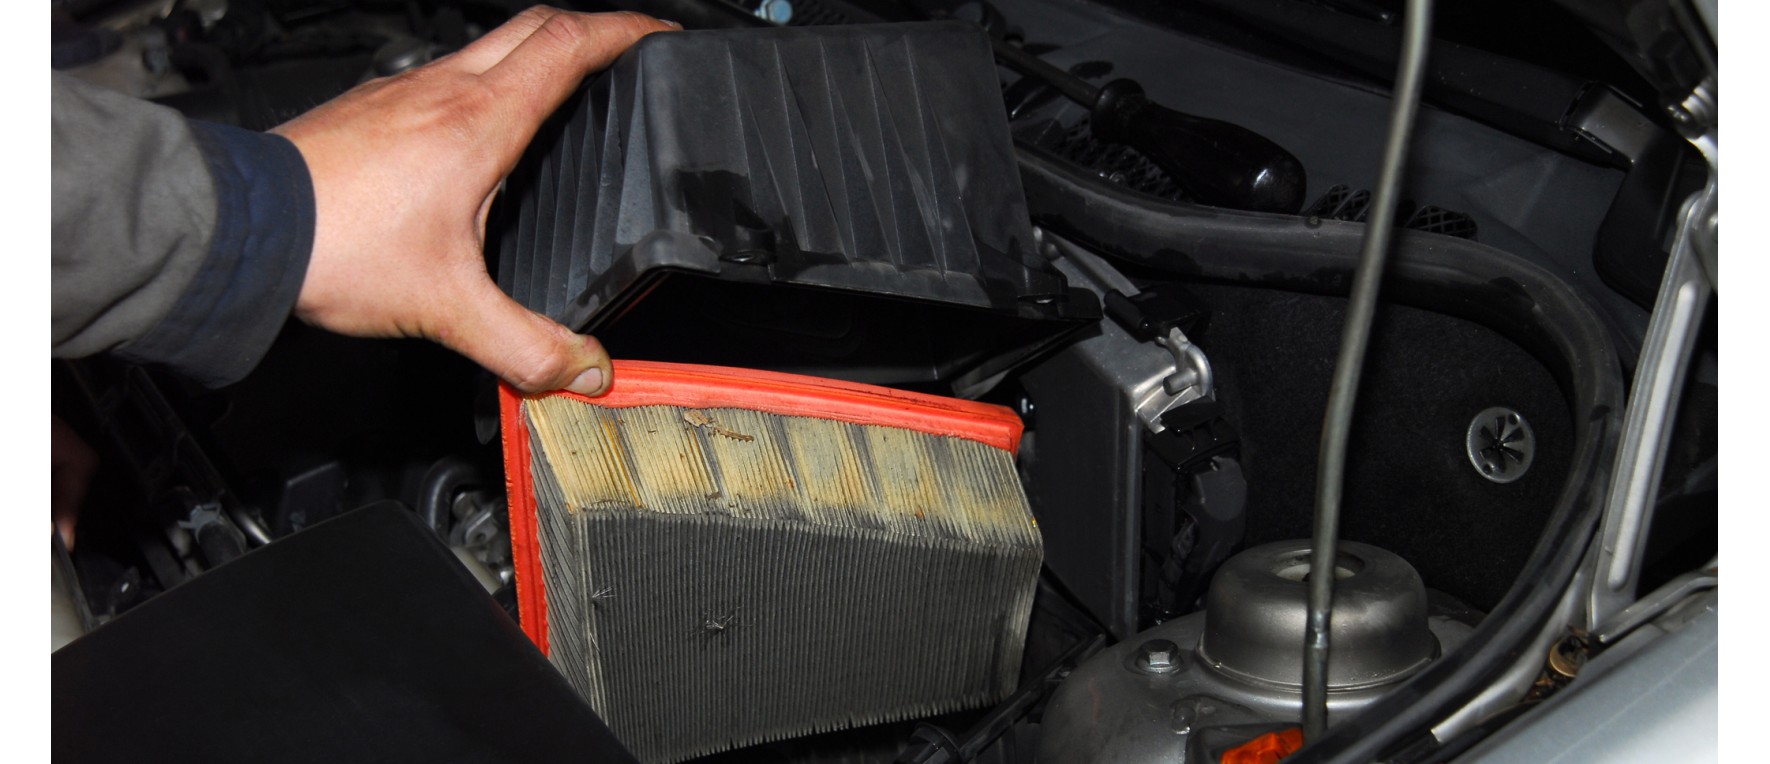 How dangerous is a dirty air filter and can it be cleaned?